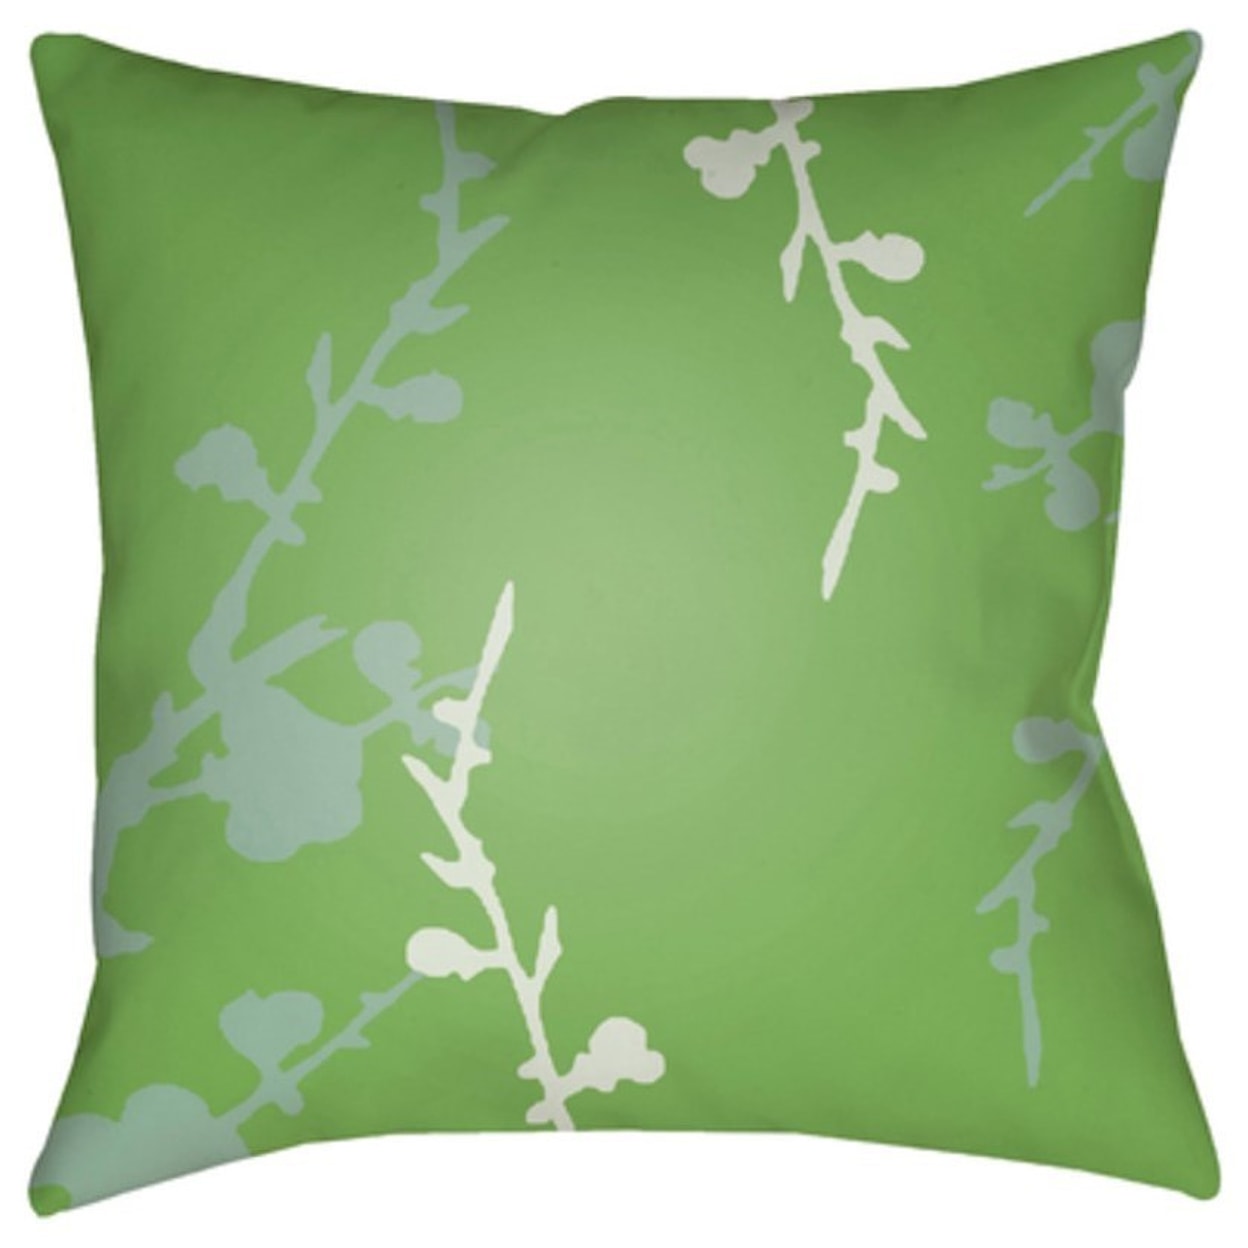 Surya Chinoiserie Floral Pillow